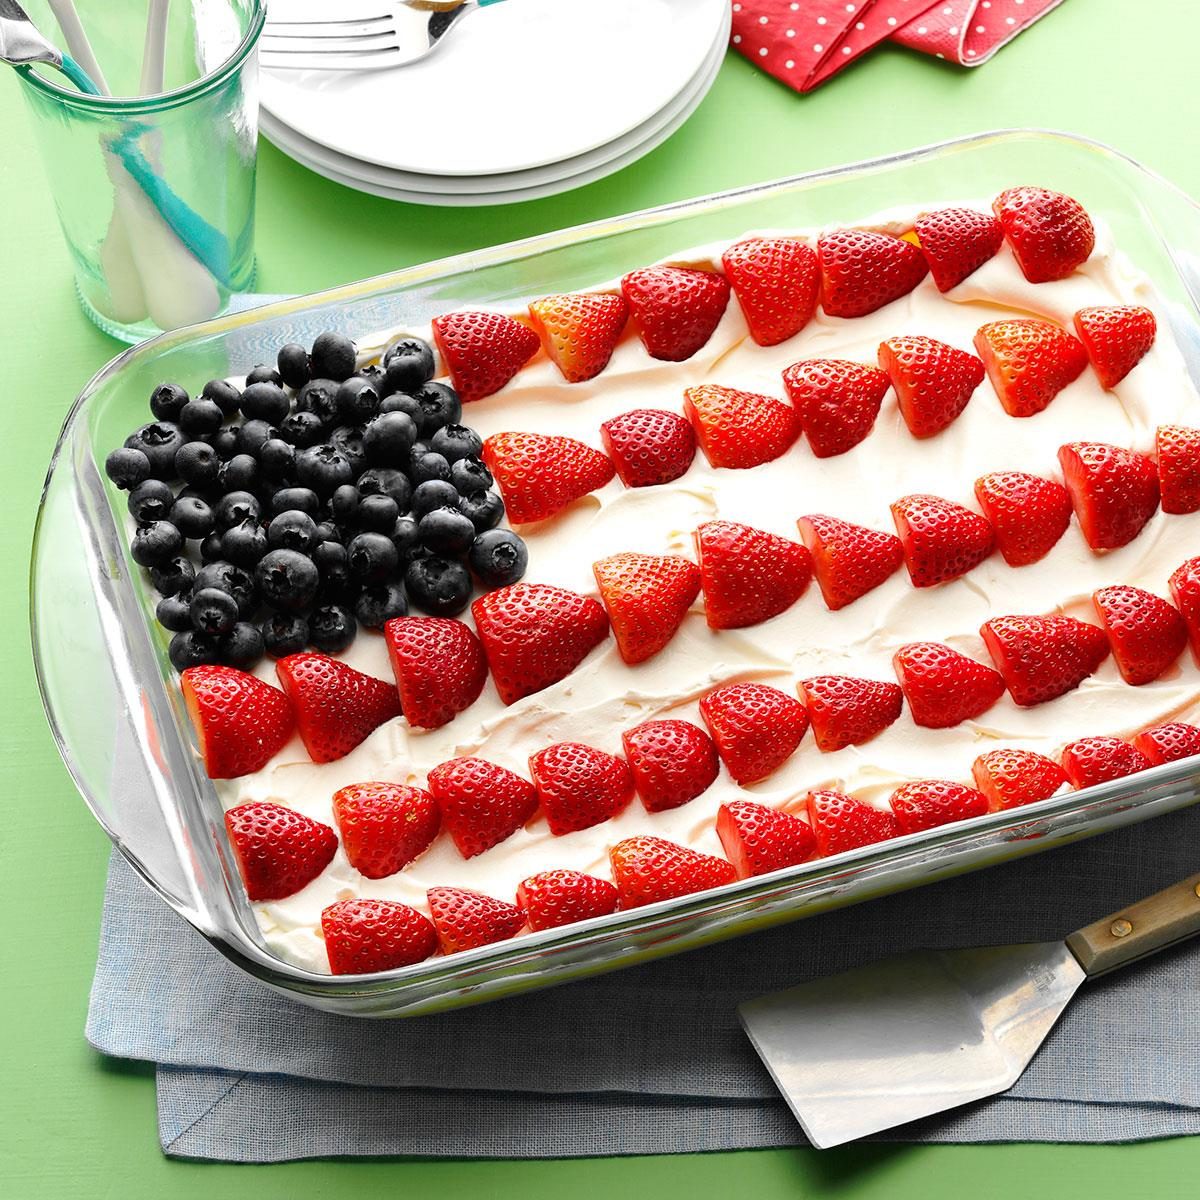 35 Fun 4th of July Party Ideas for Kids -- Food, Activities, and